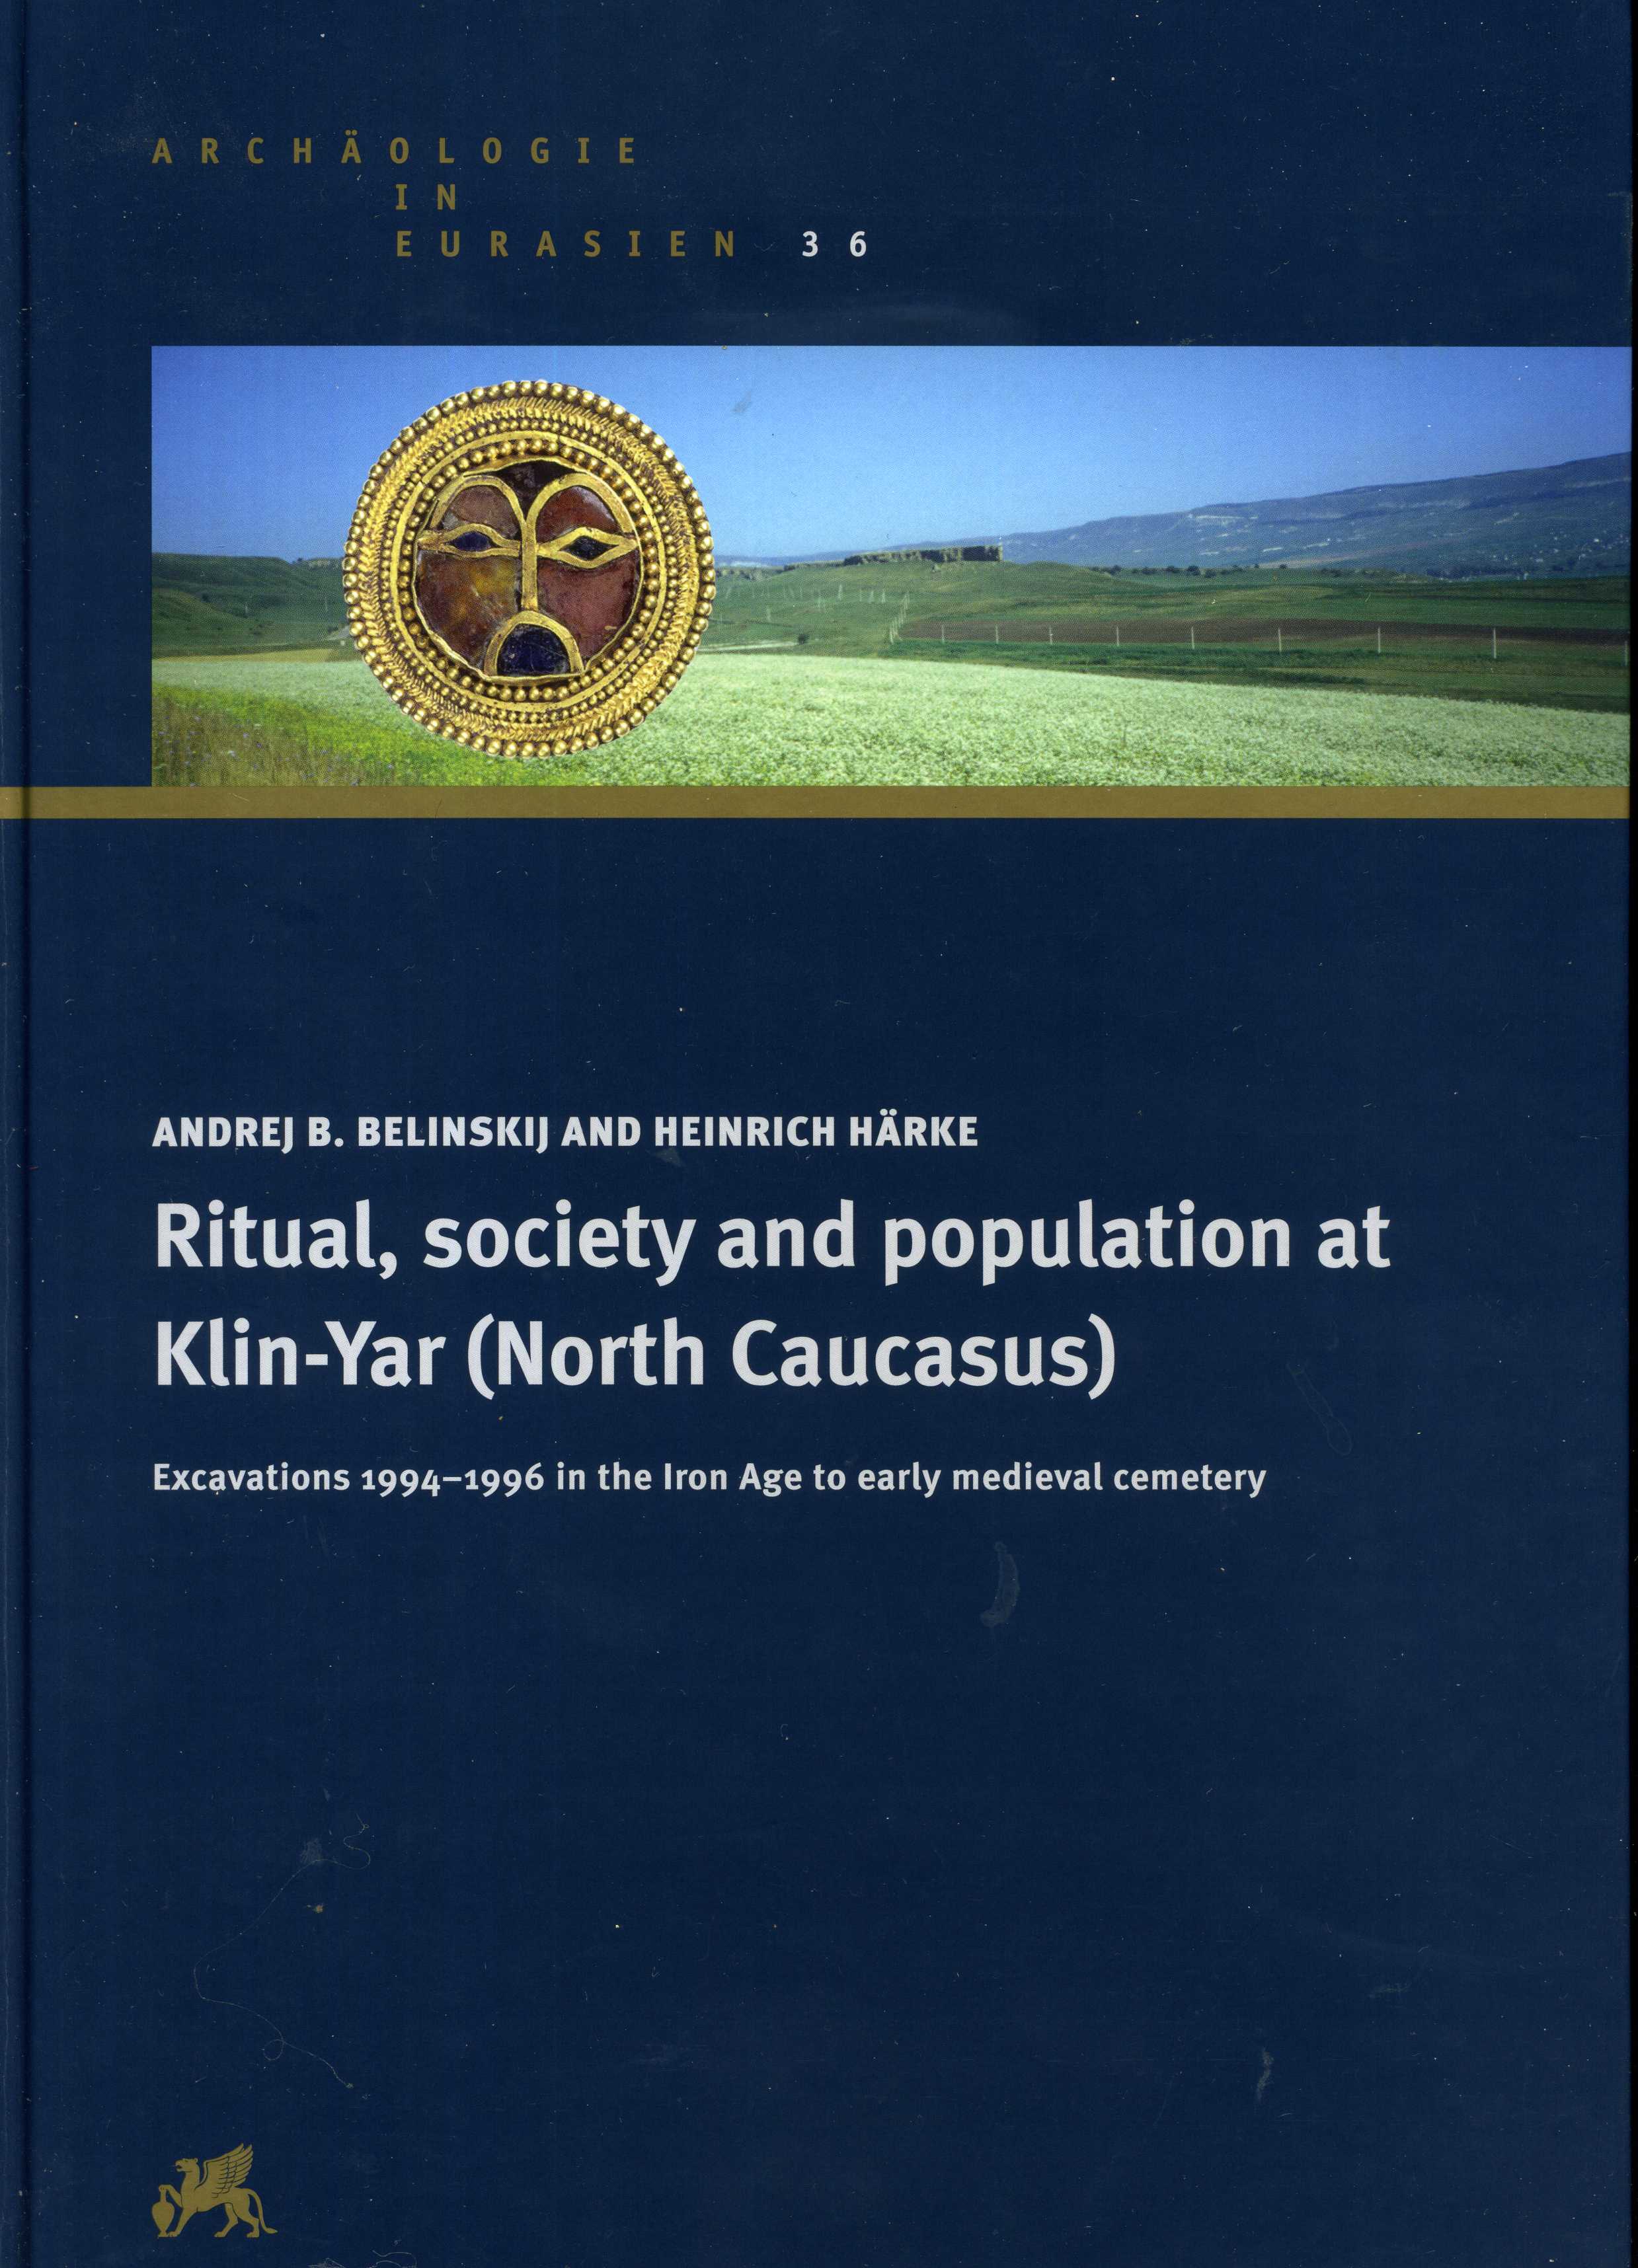 Ritual, society and population at Klin-Yar (North Caucasus): Excavations 1994-1996 in the Iron Age to early medieval cemetery